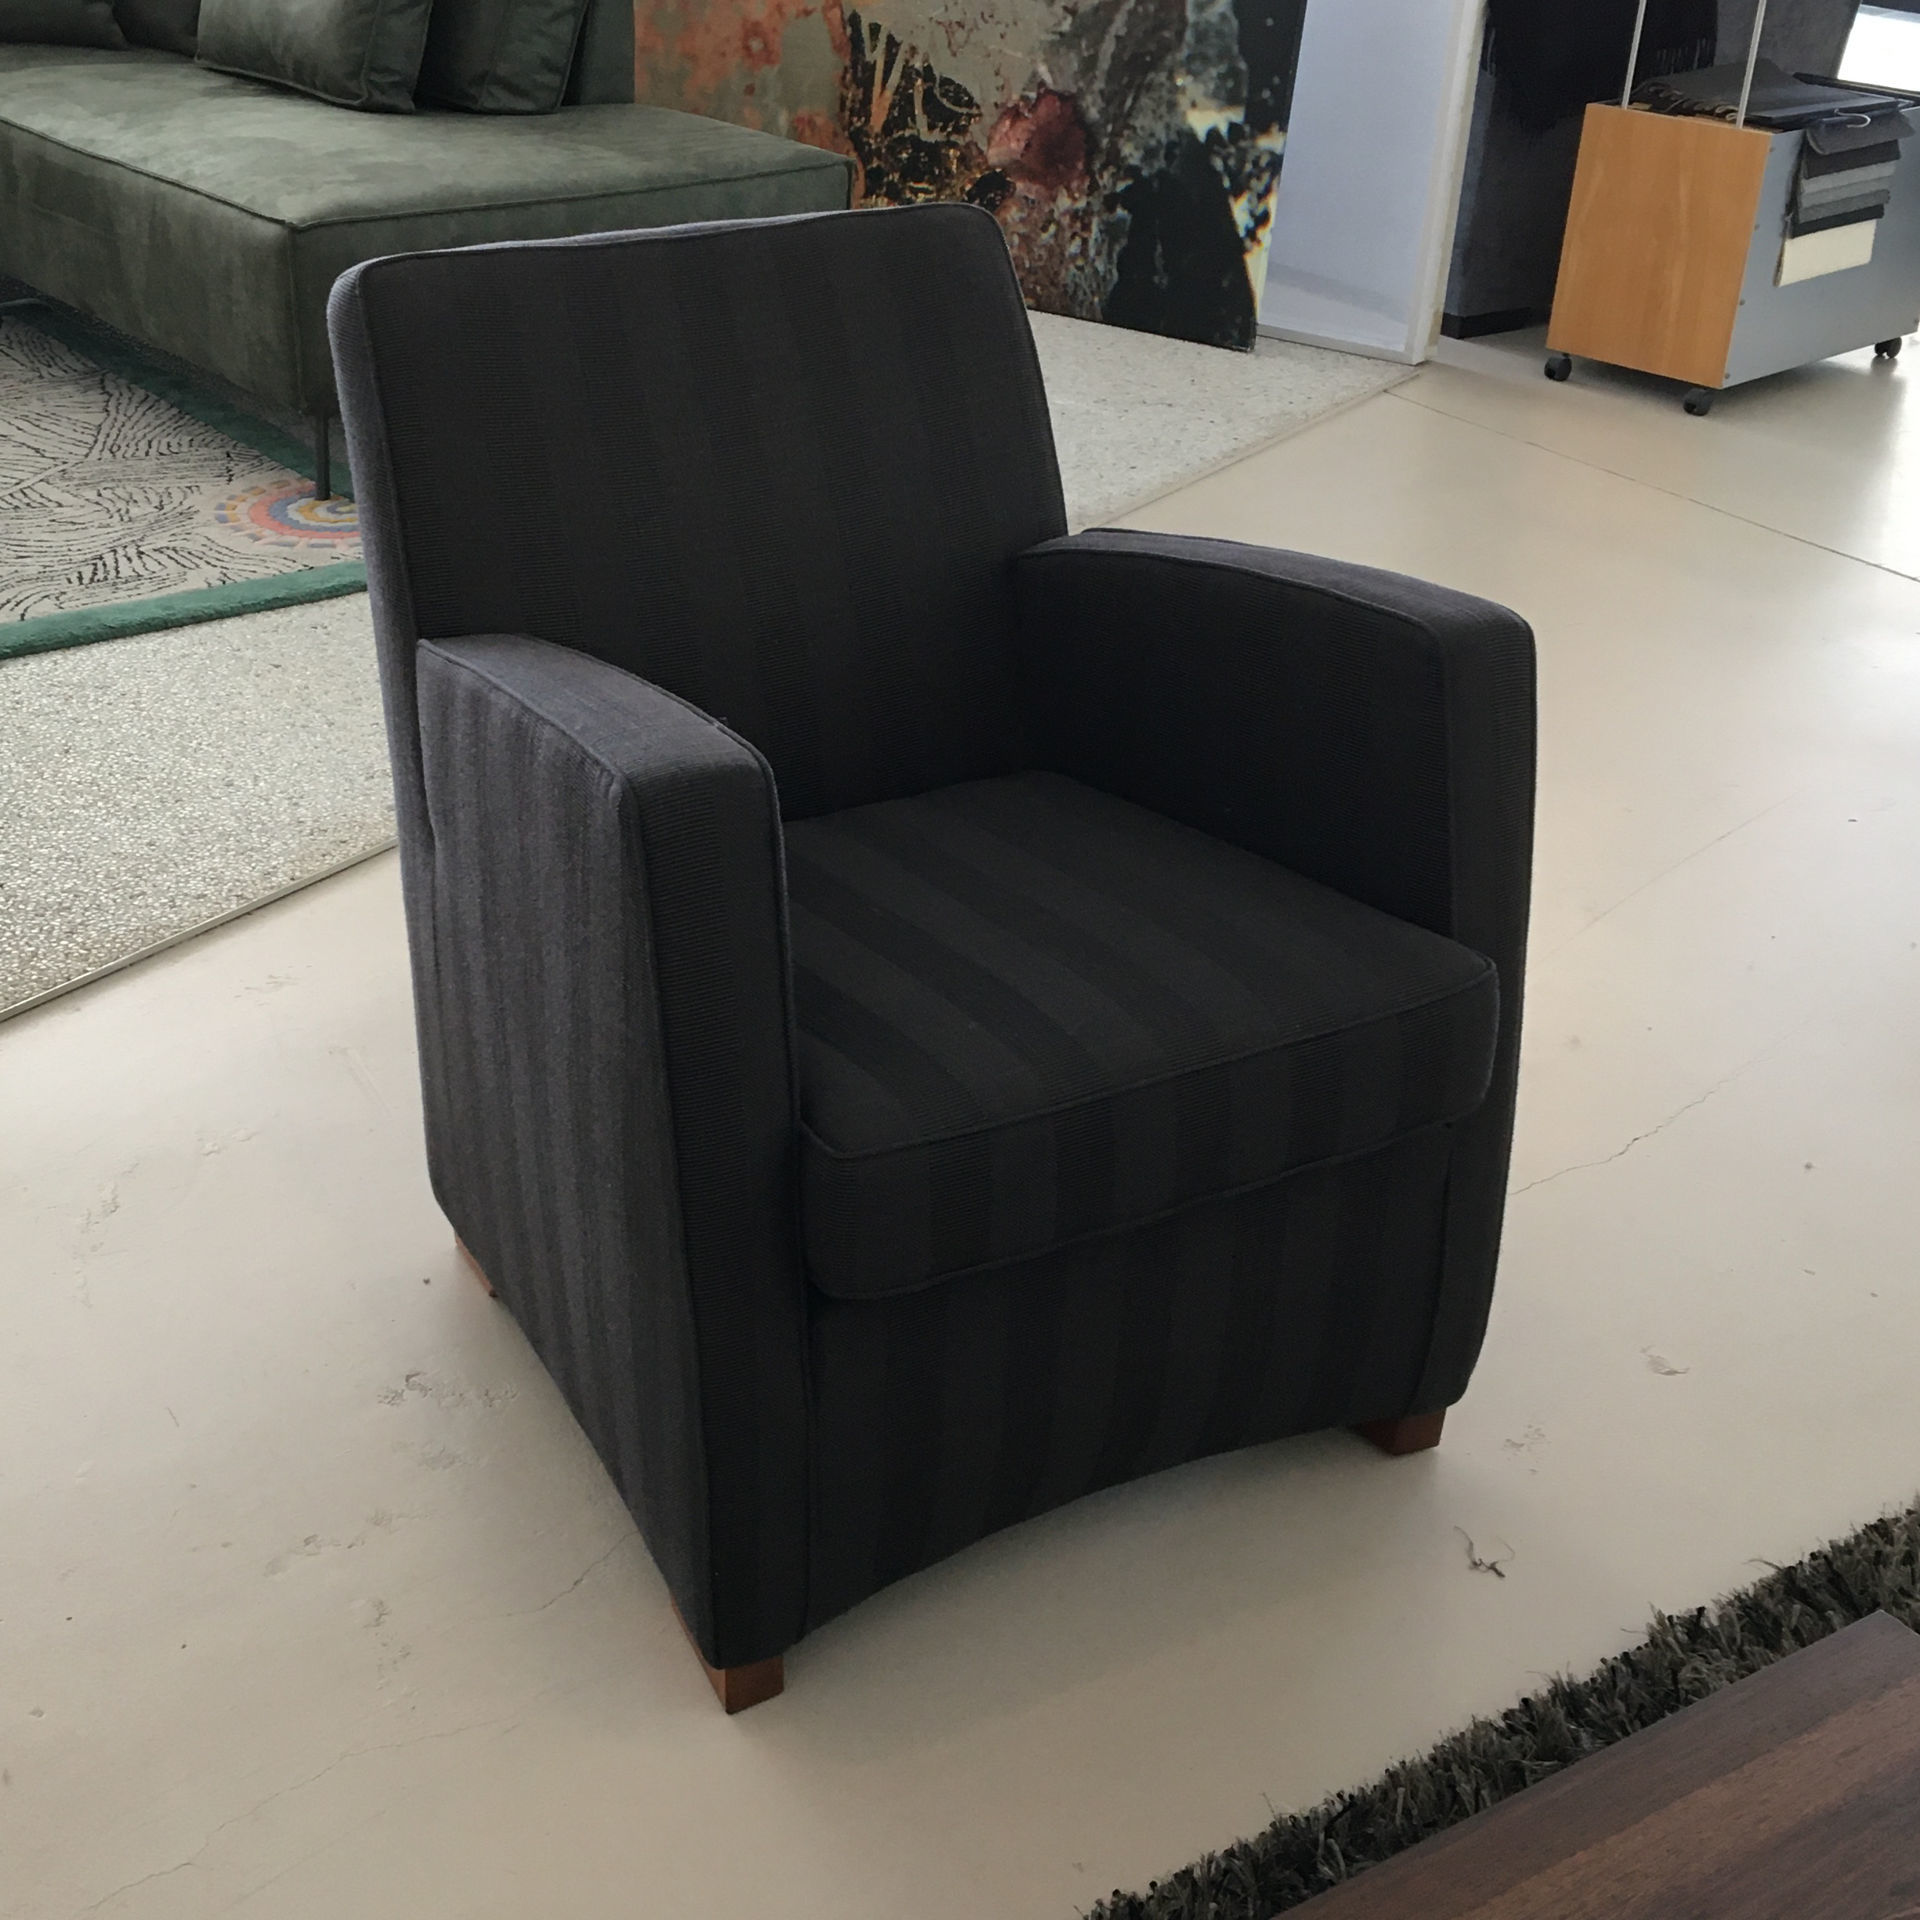 Drie B (3B) relaxfauteuil 